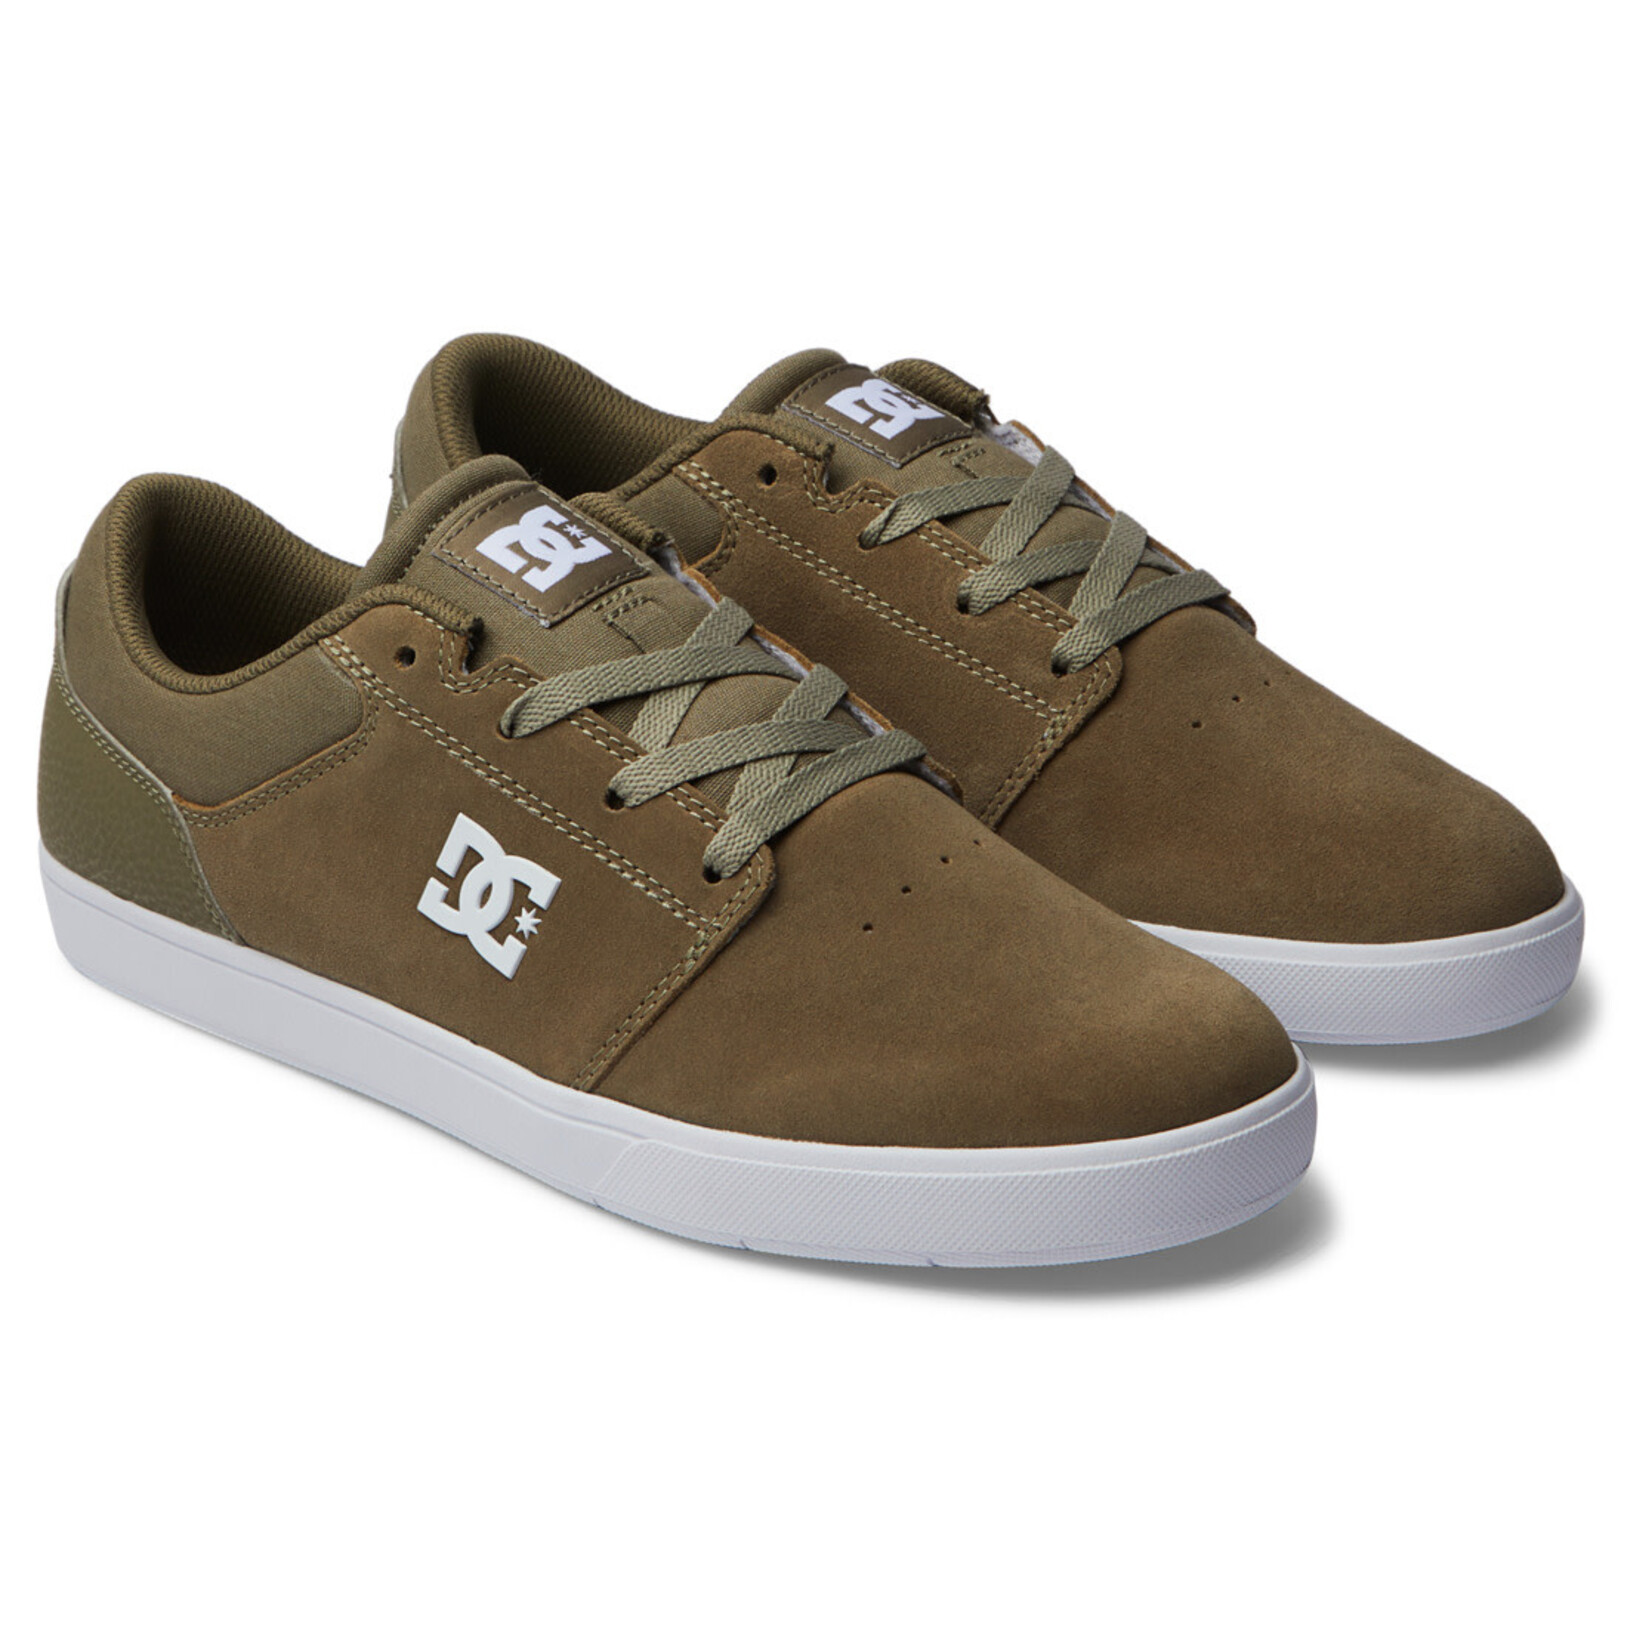 DCSHOES CRISIS 2 - Chaussures - DC SHOES Olive/White